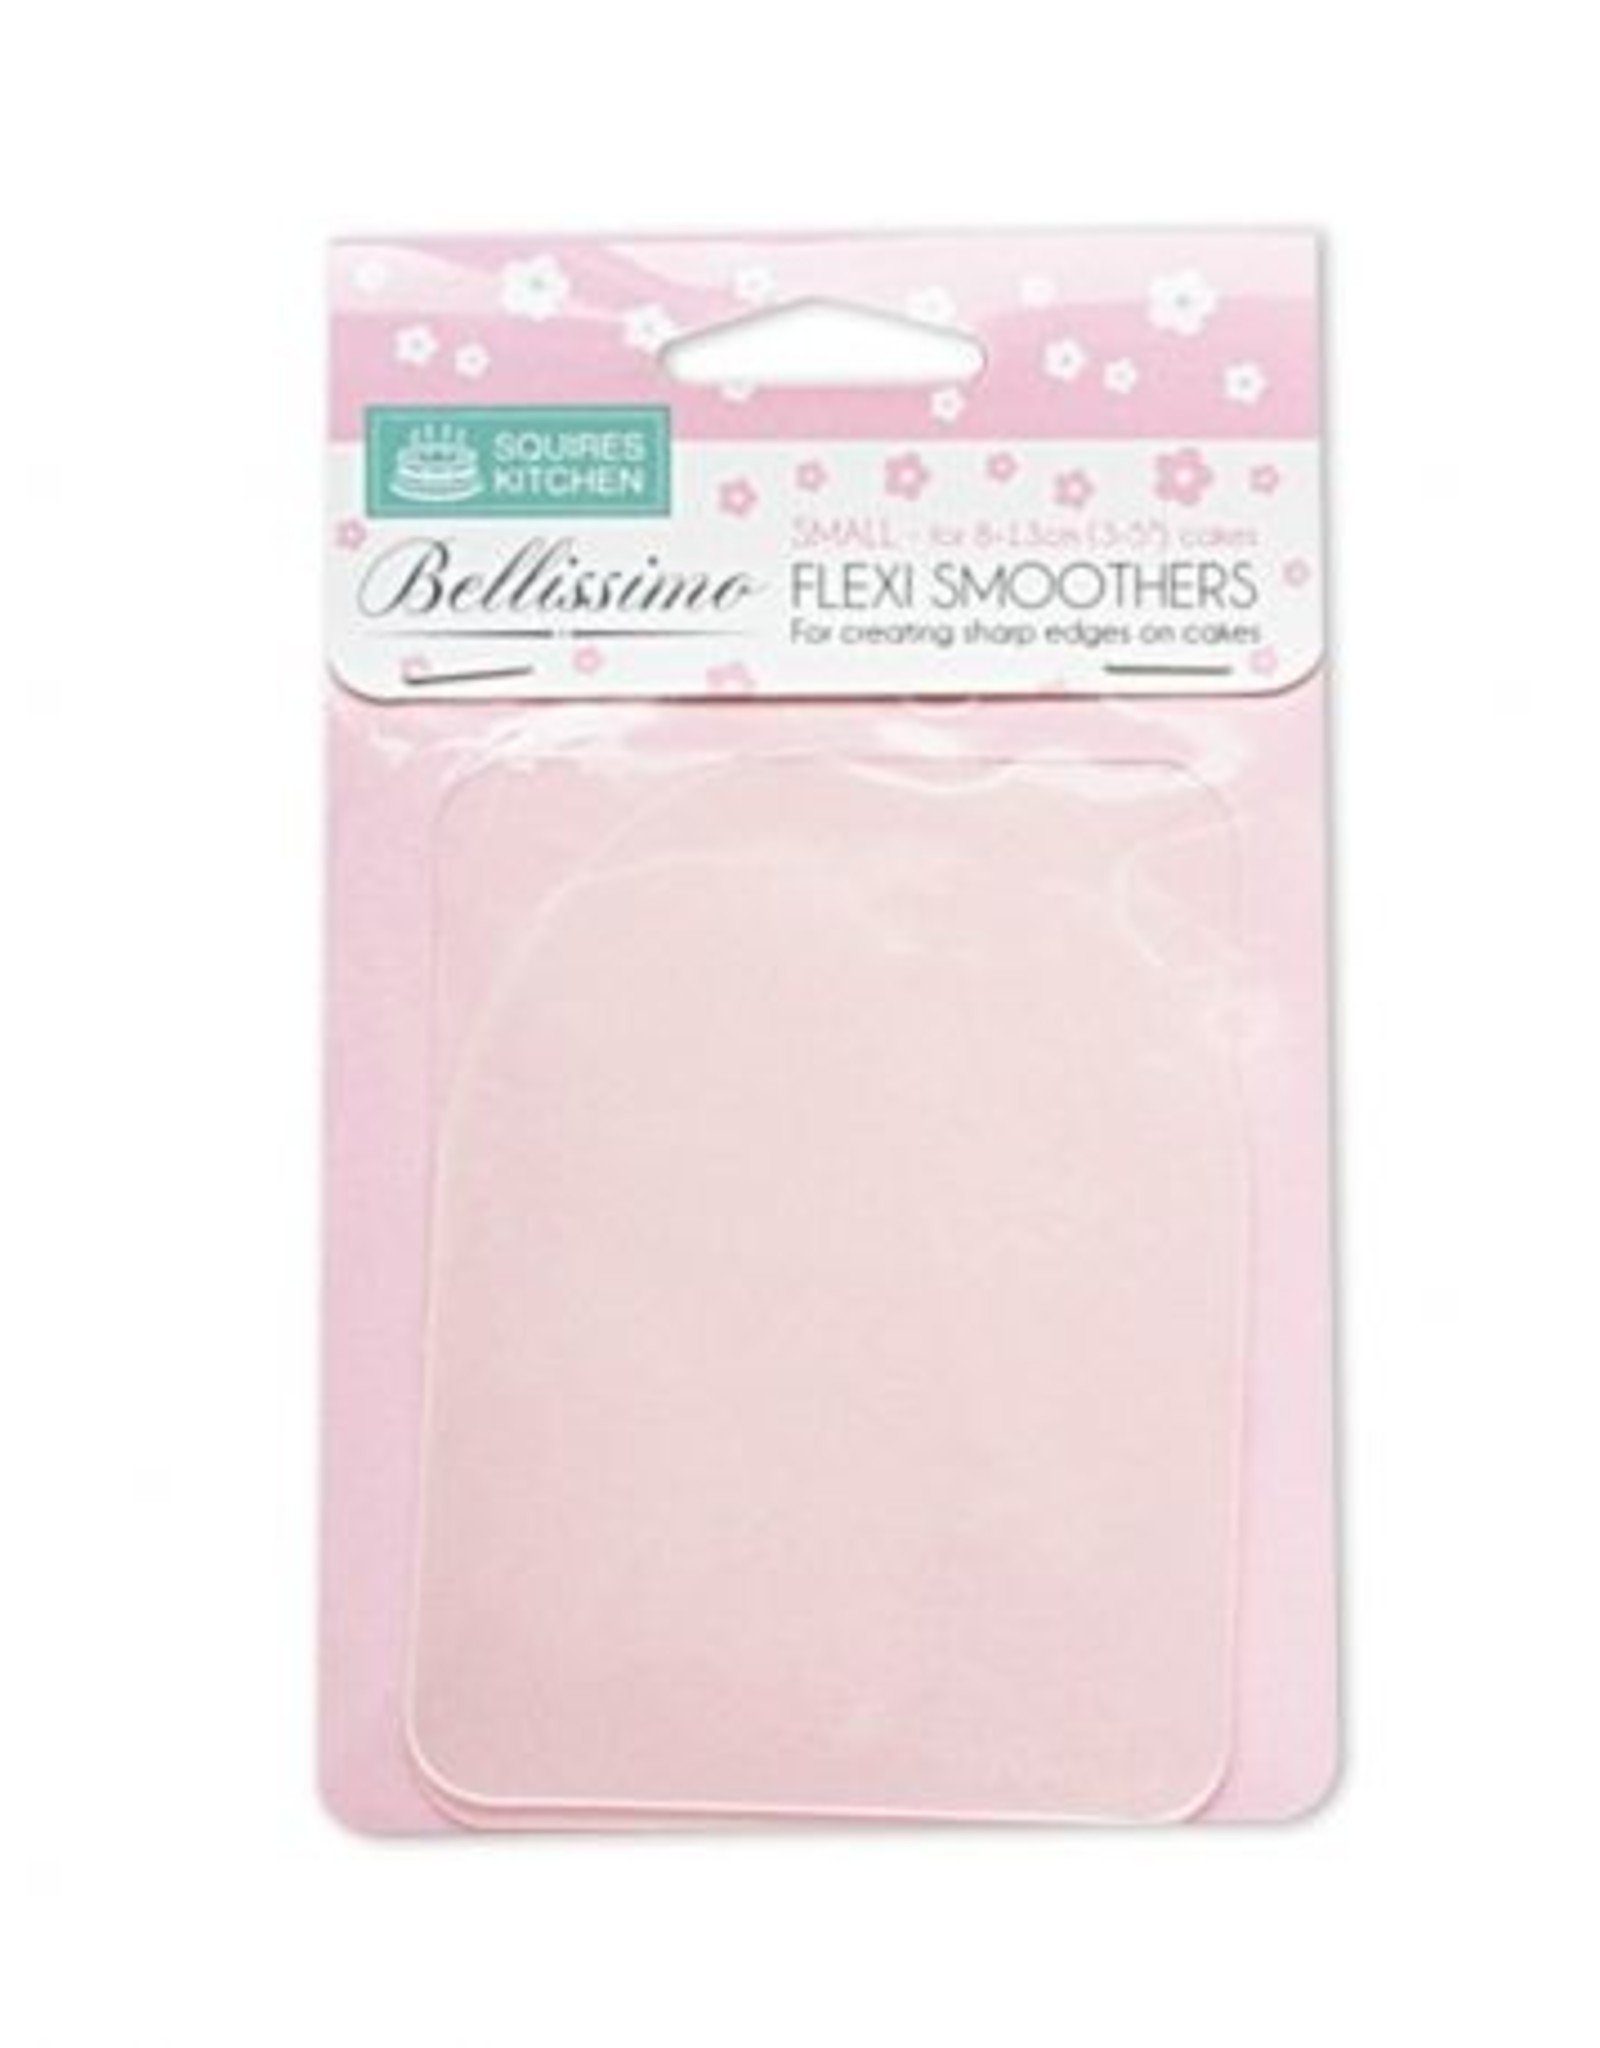 Squires Kitchen Squires Kitchen Bellissimo Flexi Smoothers -Small Cakes-